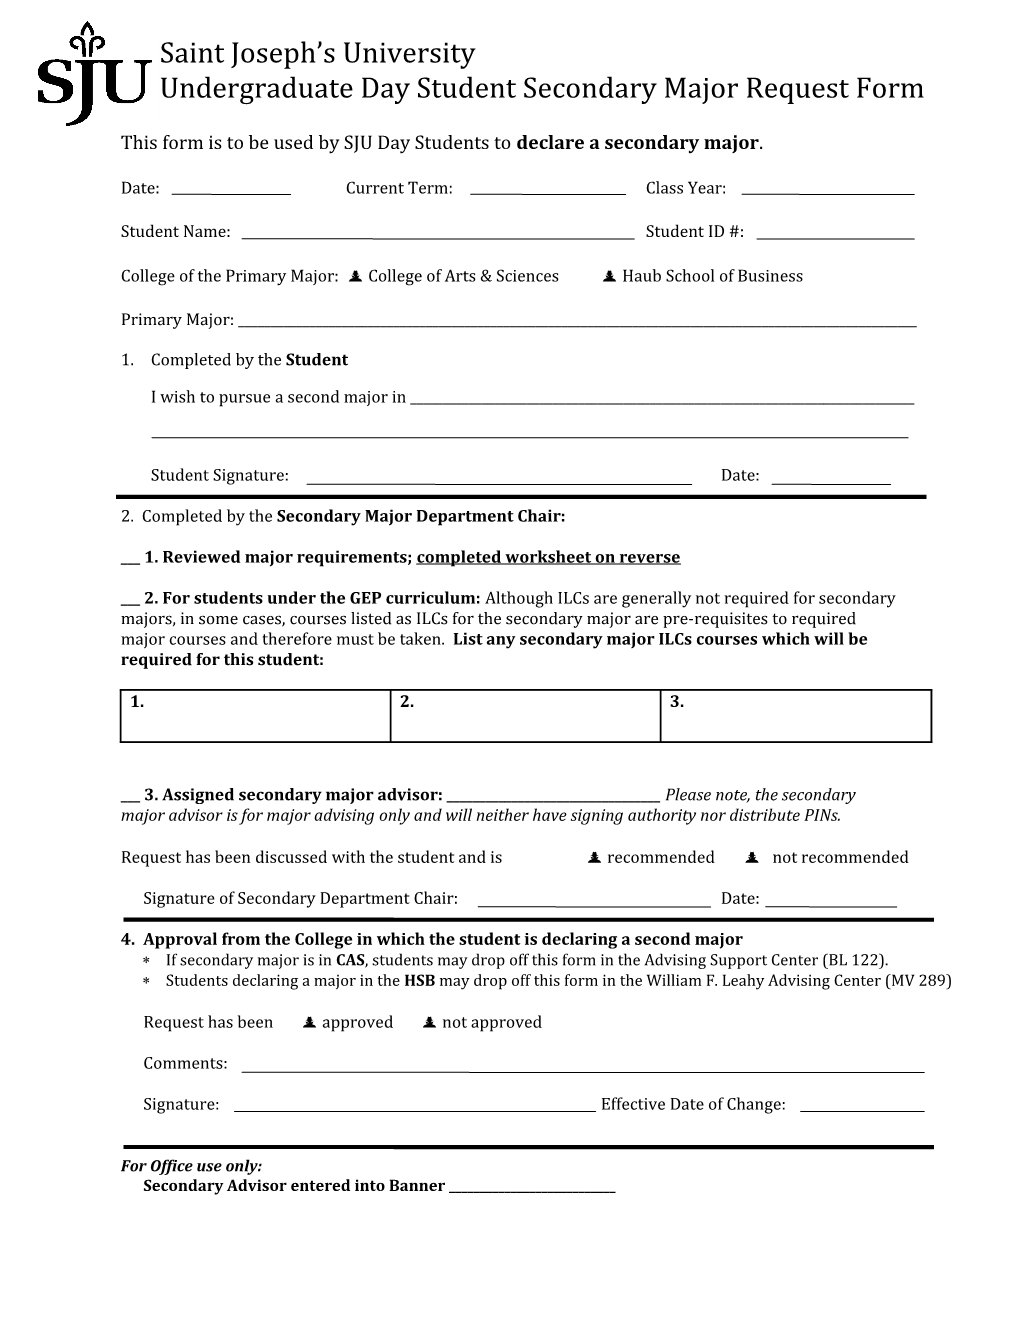 This Form Is to Be Used by SJU Day Students to Declare a Secondary Major